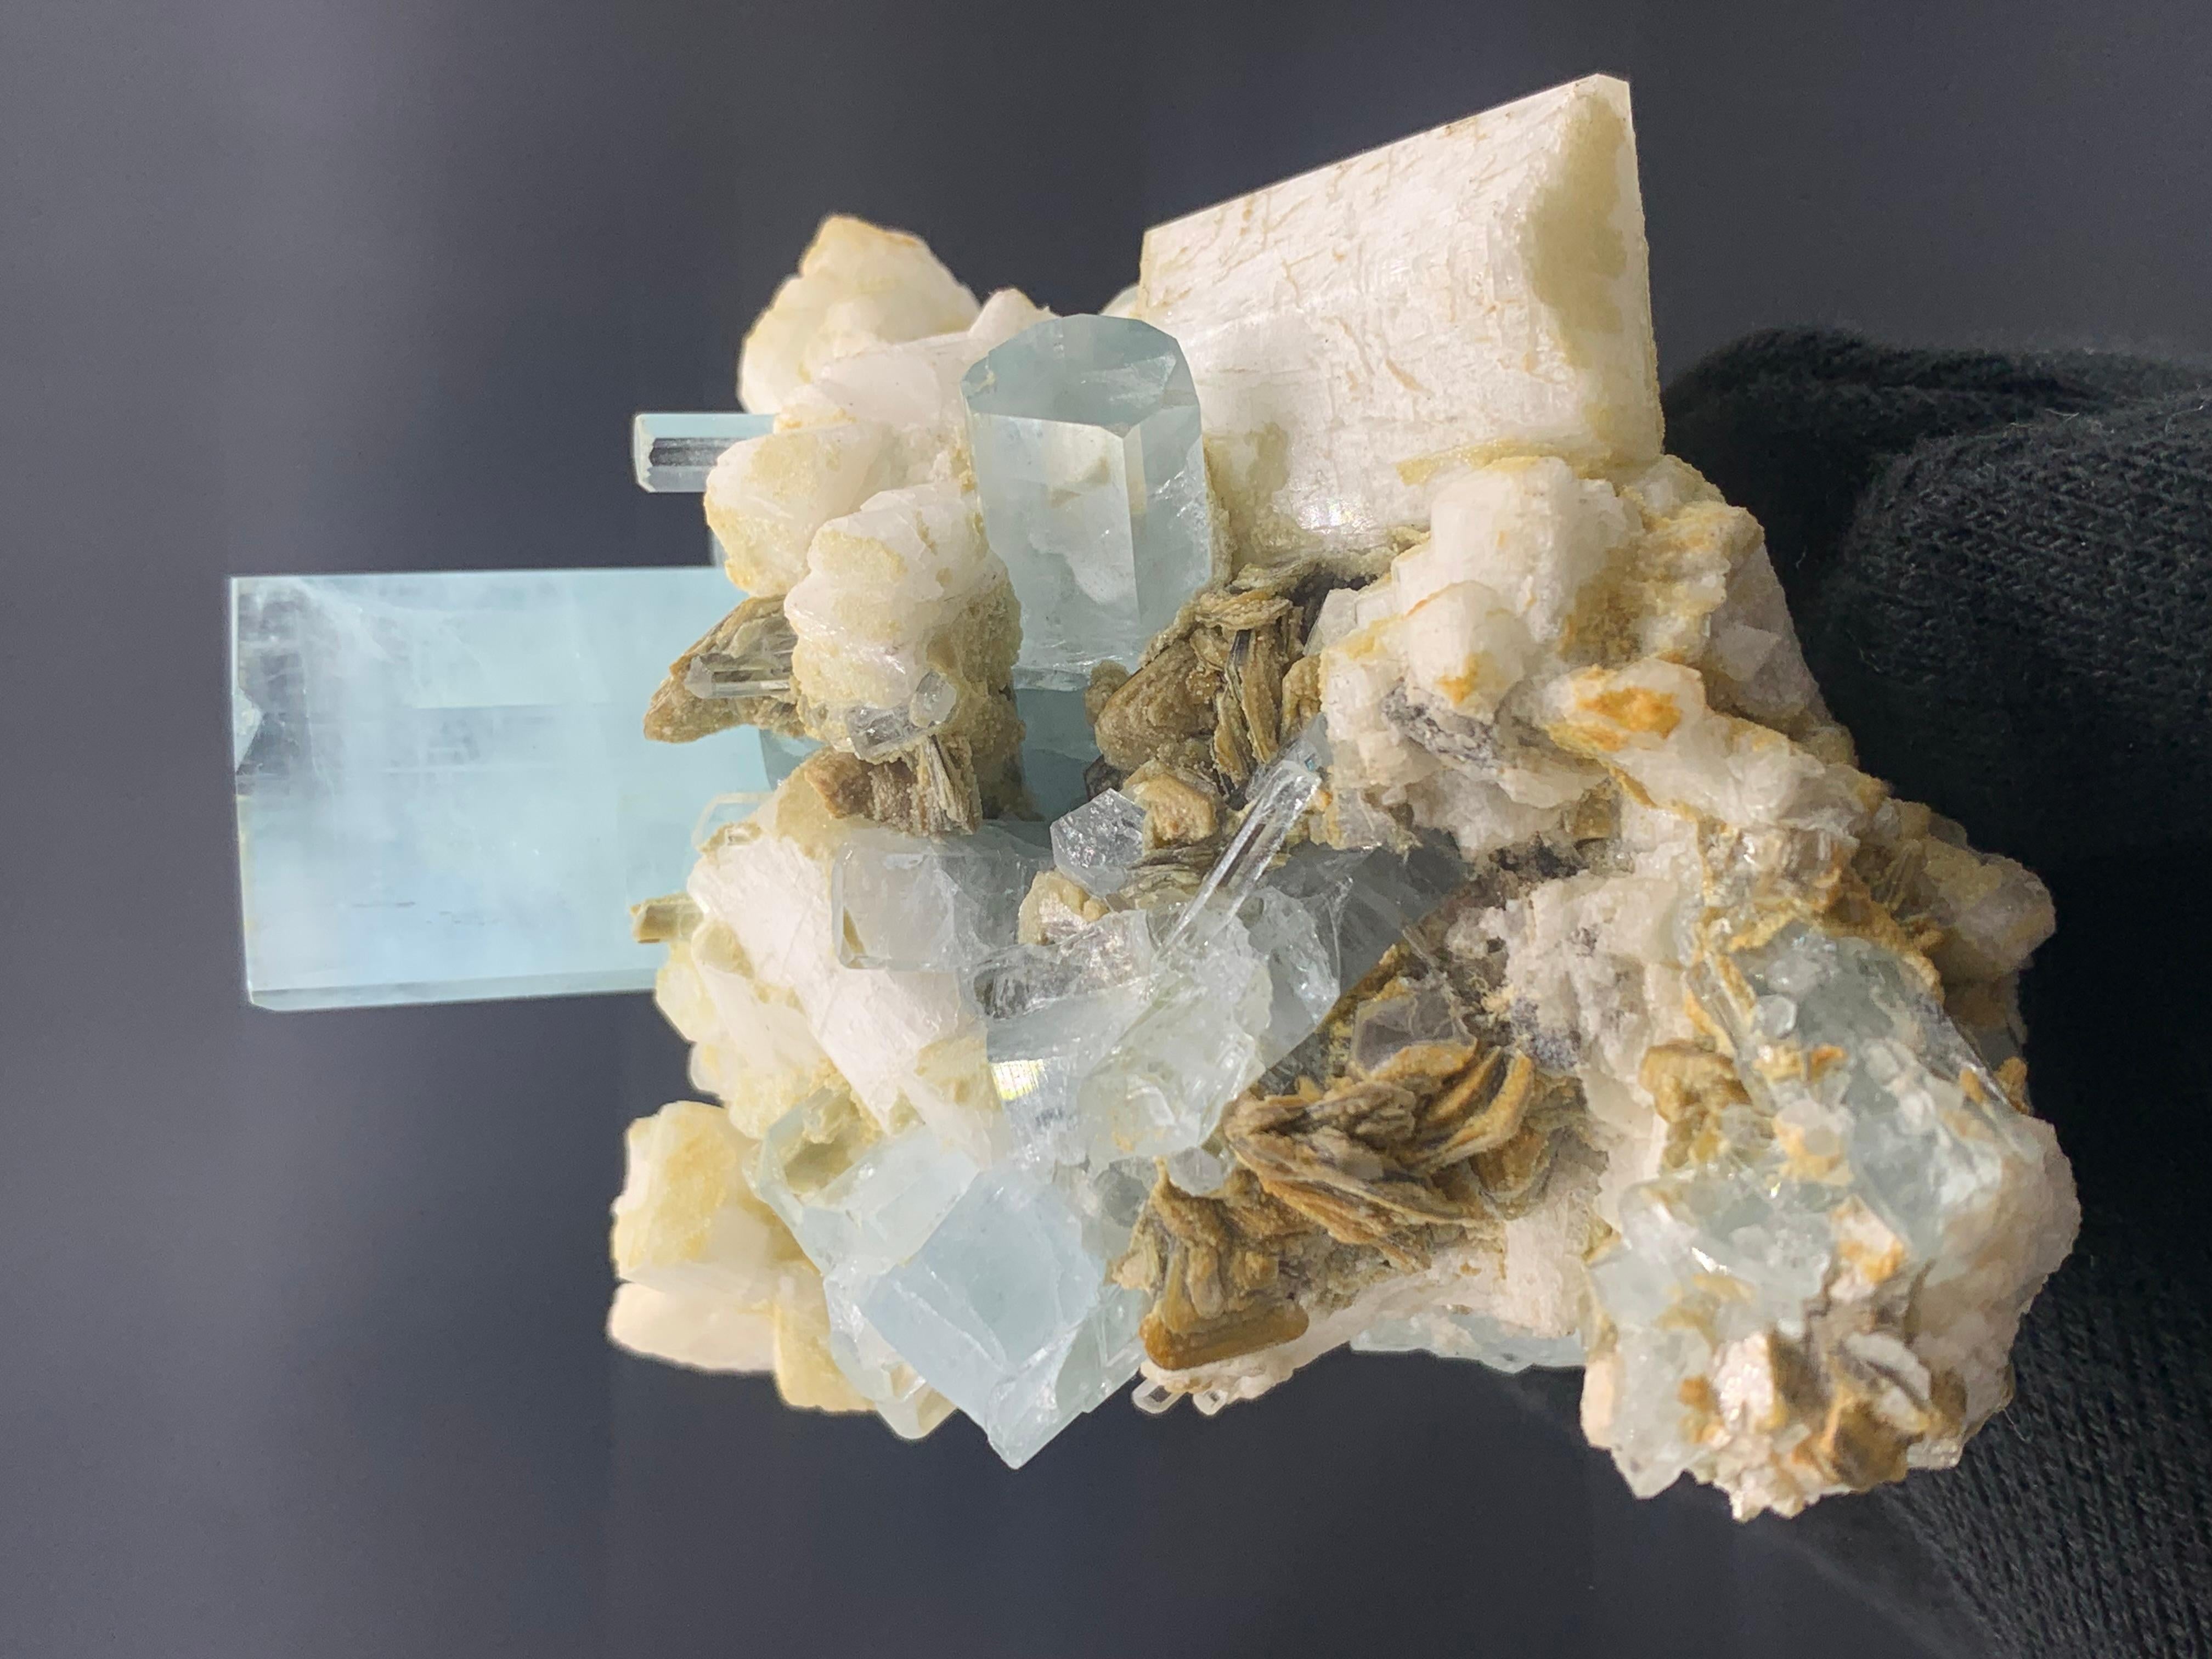 Weight: 200 Gram 
Dimension: 8.1 x 6.6 x 6.8 Cm
Origin: Skardu Valley, Pakistan 

Aquamarine is a pale-blue to light-green variety of beryl. The color of aquamarine can be changed by heat. Aquamarine has a chemical composition of Be₃Al₂Si₆O₁₈, also